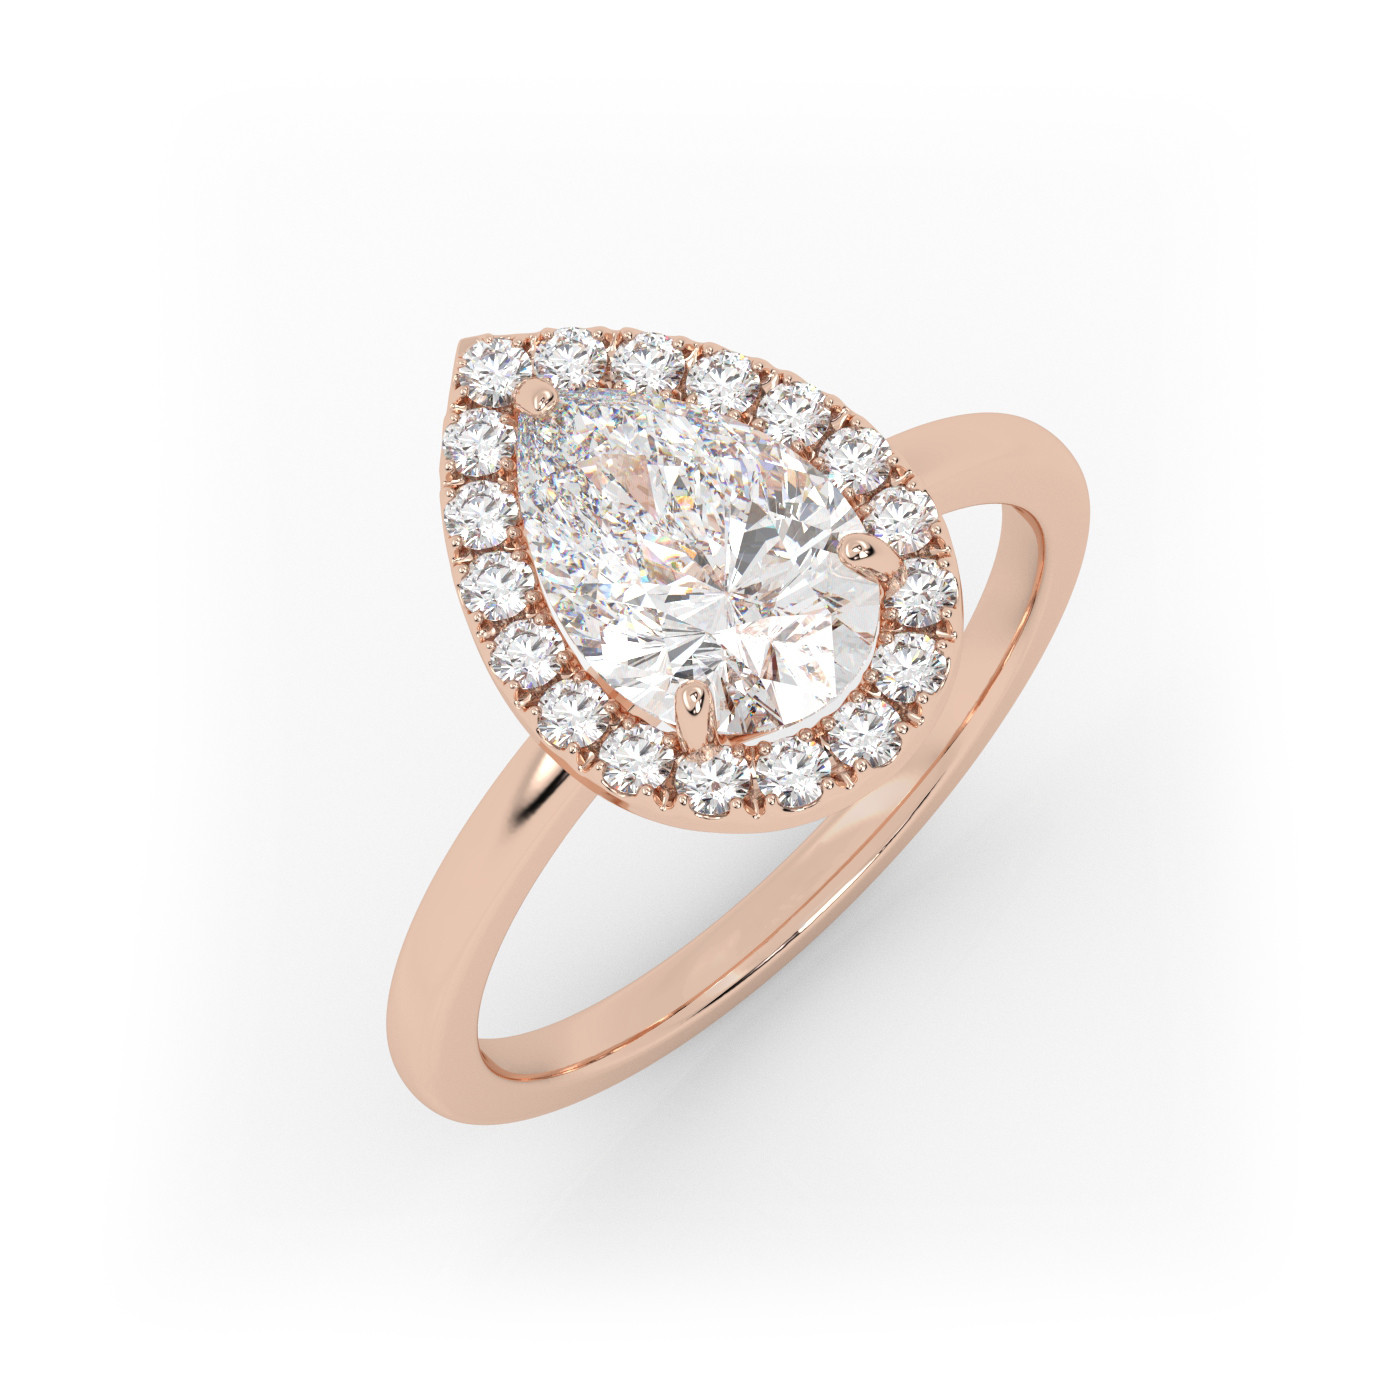 18K ROSE GOLD Pear Diamond Cut Engagement Ring with Halo Style